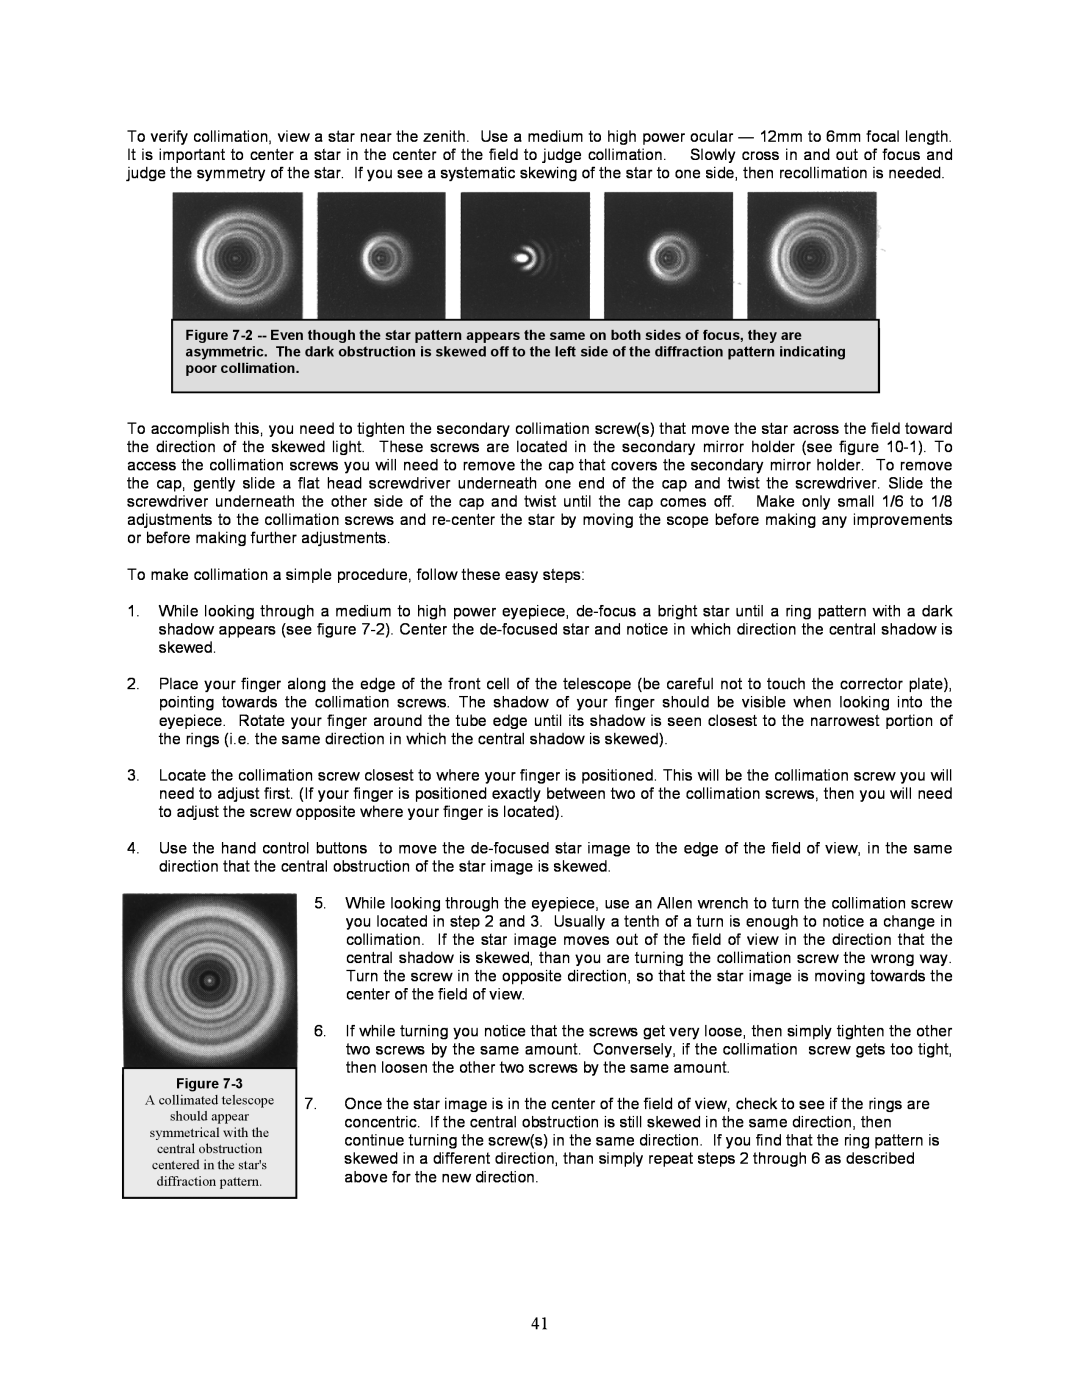 Celestron NexStar 8i manual To make collimation a simple procedure, follow these easy steps 